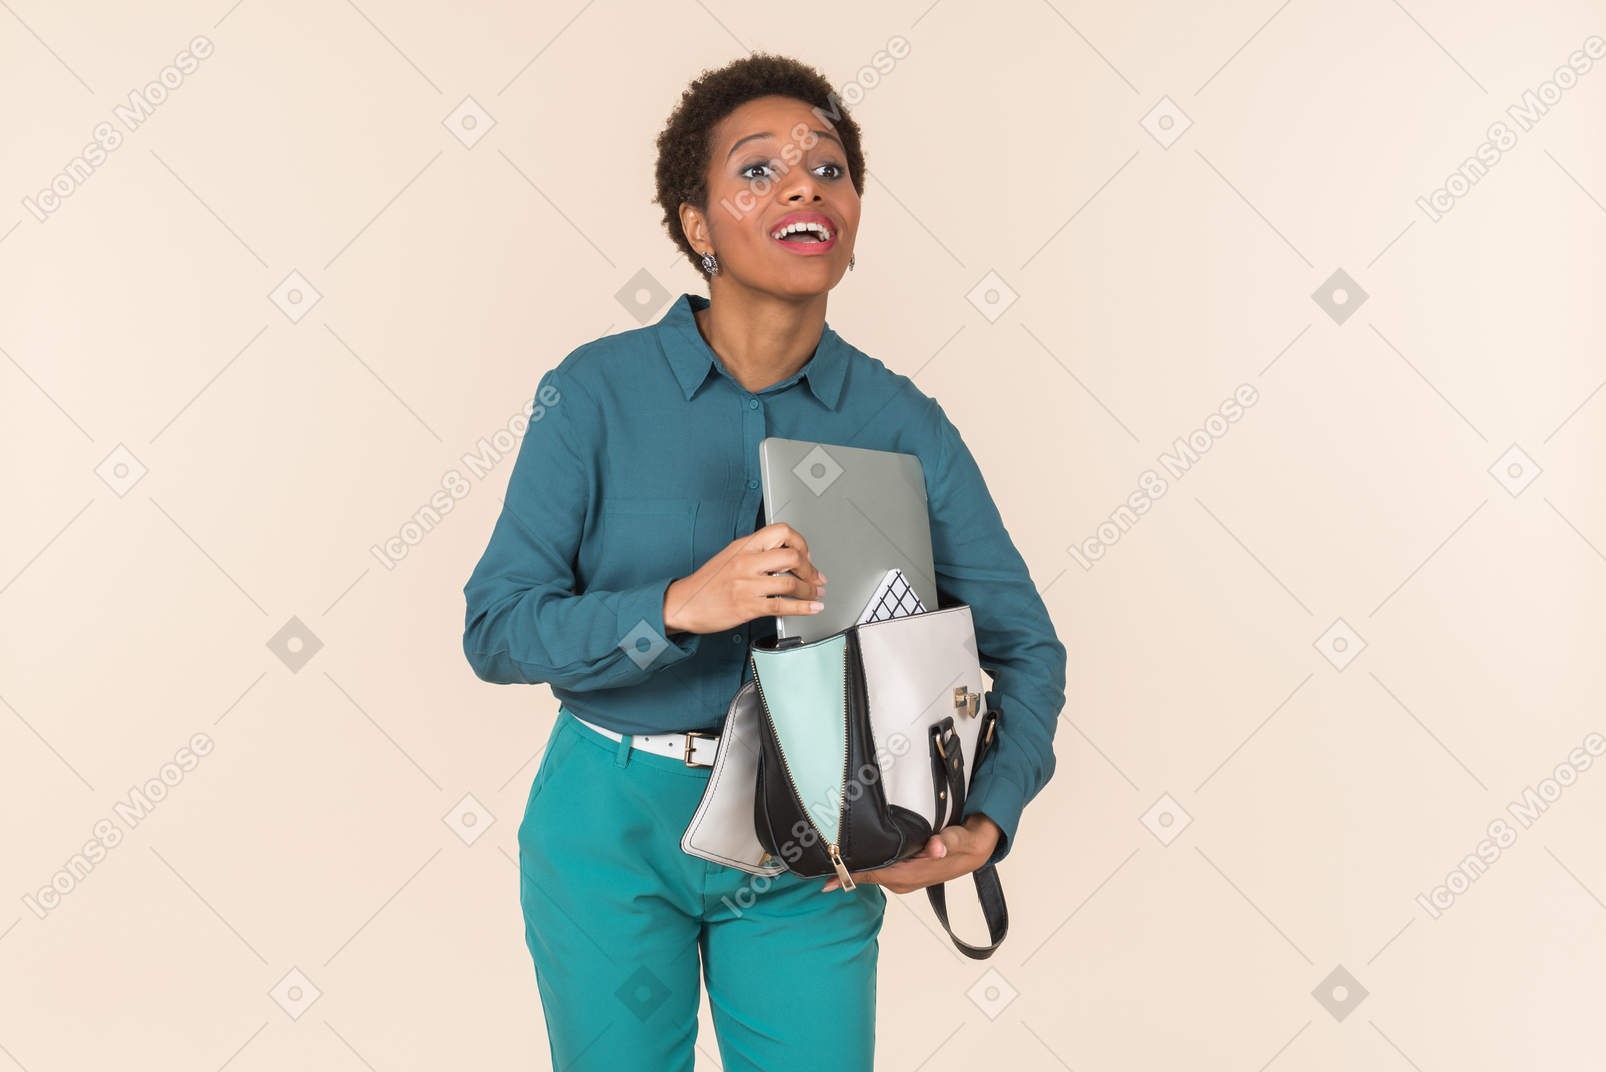 Holding bag and papers young woman looks like in a hurry